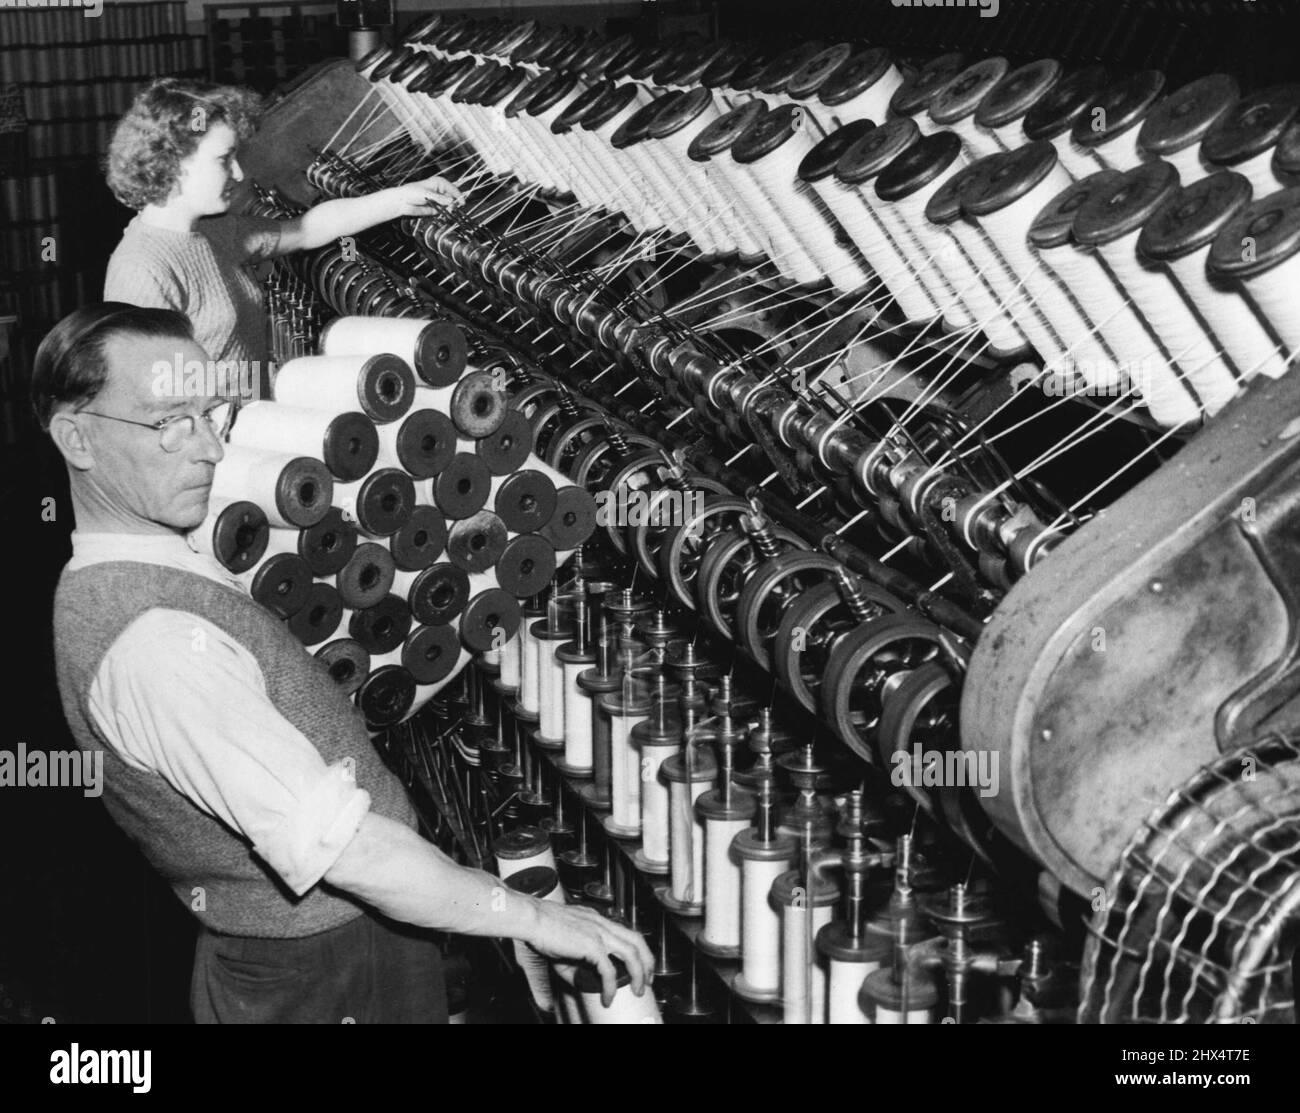 Sheep Supp. -- At John Vicars Pty Ltd Marrickville. In the drawing department, this is the roving operation. The operator at rear is watching the combed wool being drawn into fine slivers ready for spinning, while the man collects the full spools from the machine. May 28, 1952. (Photo by Frank Albert Charles Burke/Fairfax Media). Stock Photo